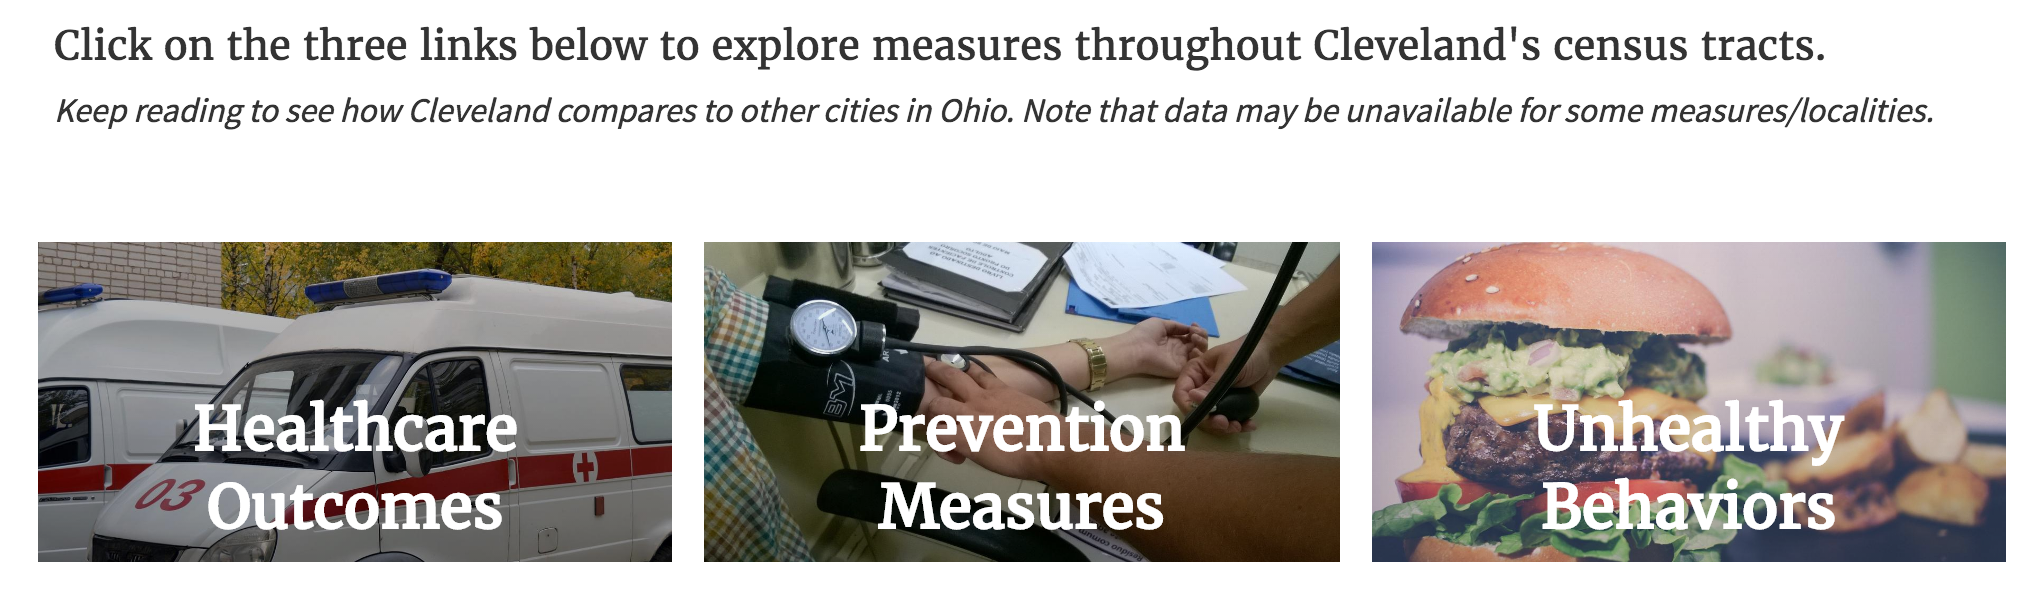 The Cleveland data story is actually four stories: a landing page and three sub-pages that each focus on a particular category. A simple navigation menu, created with hyperlinked images, links them together.&nbsp;